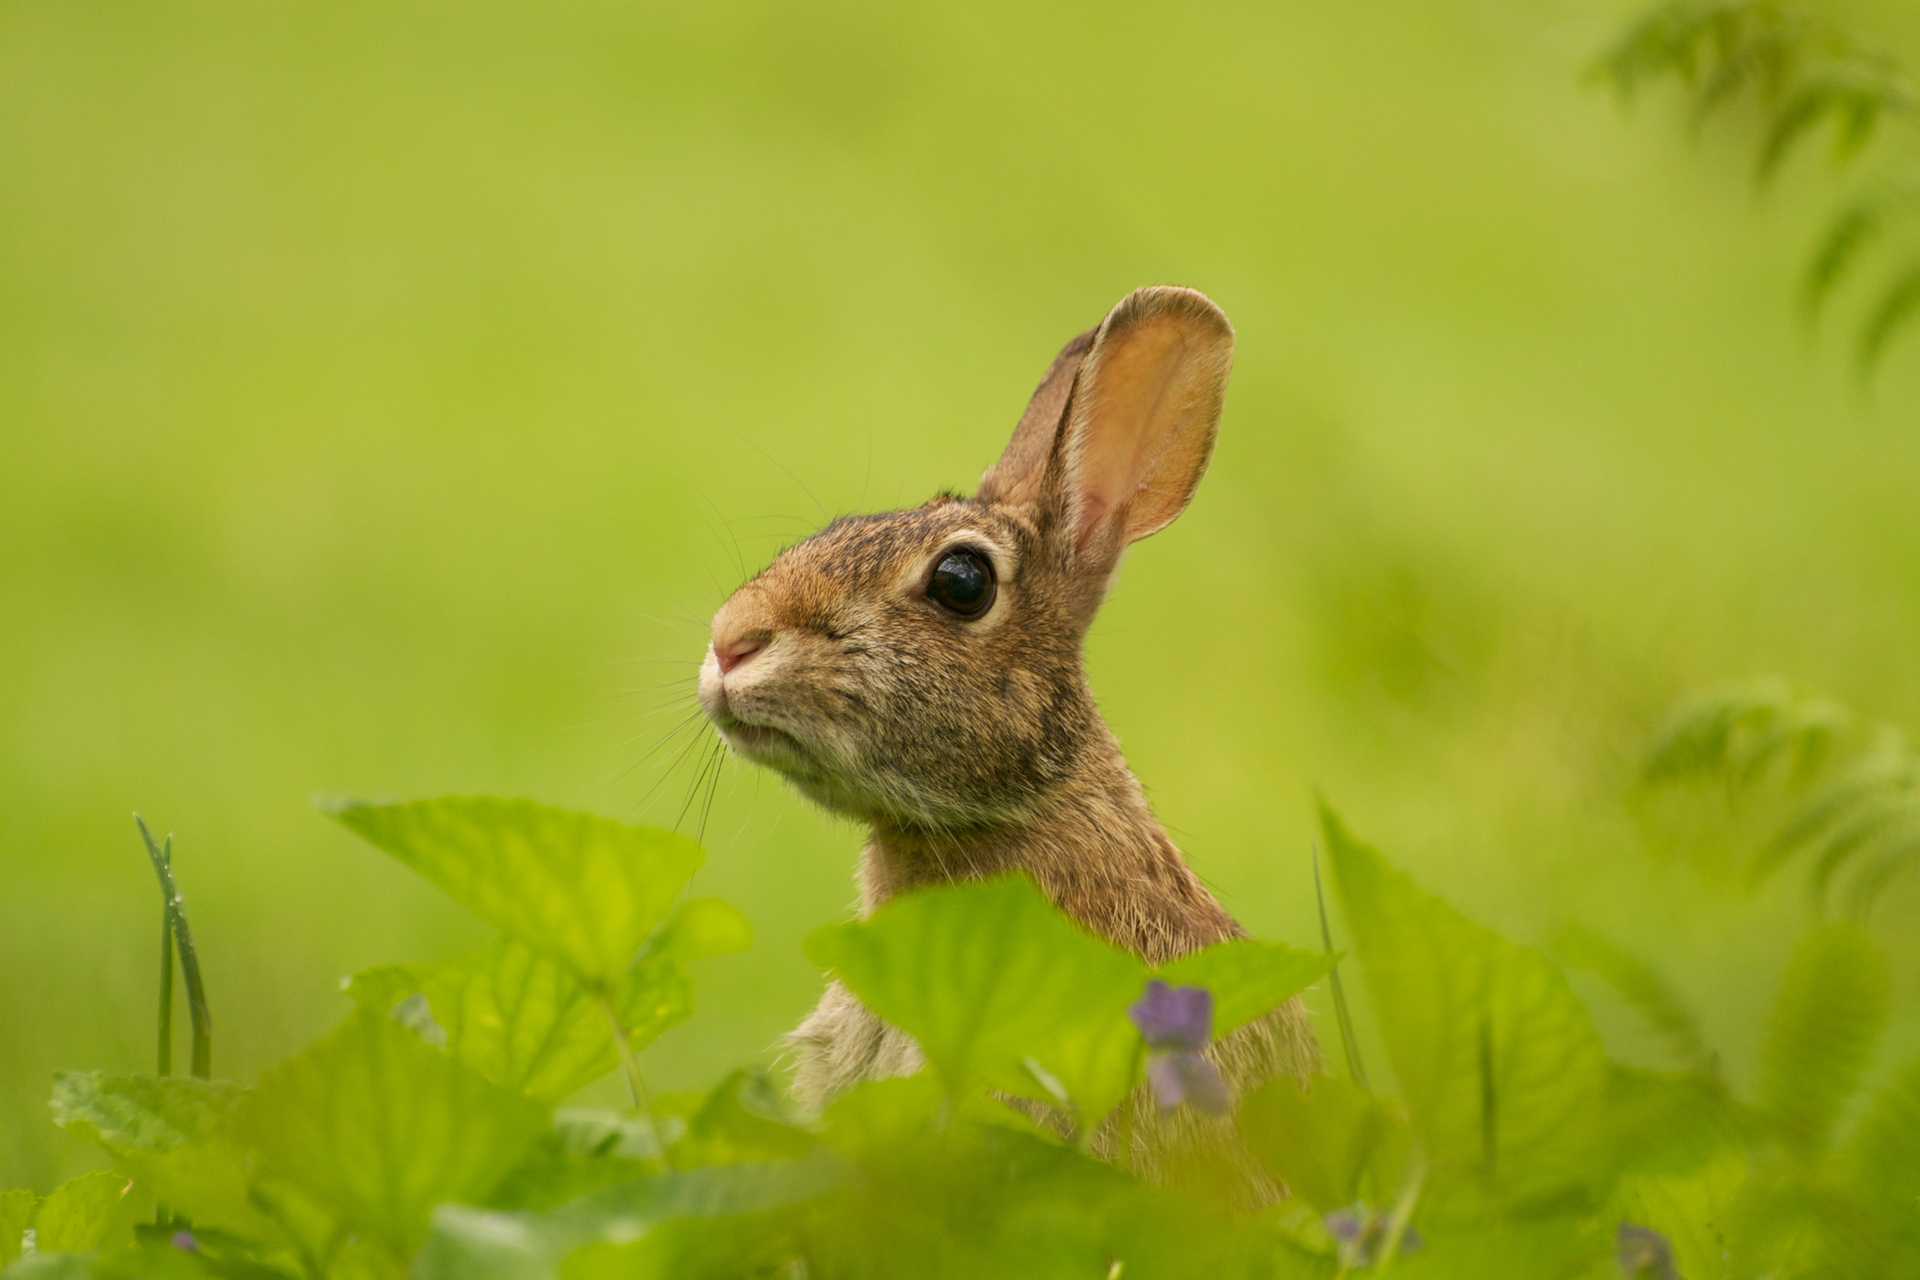 A rabbit peaking its head above green leaves.